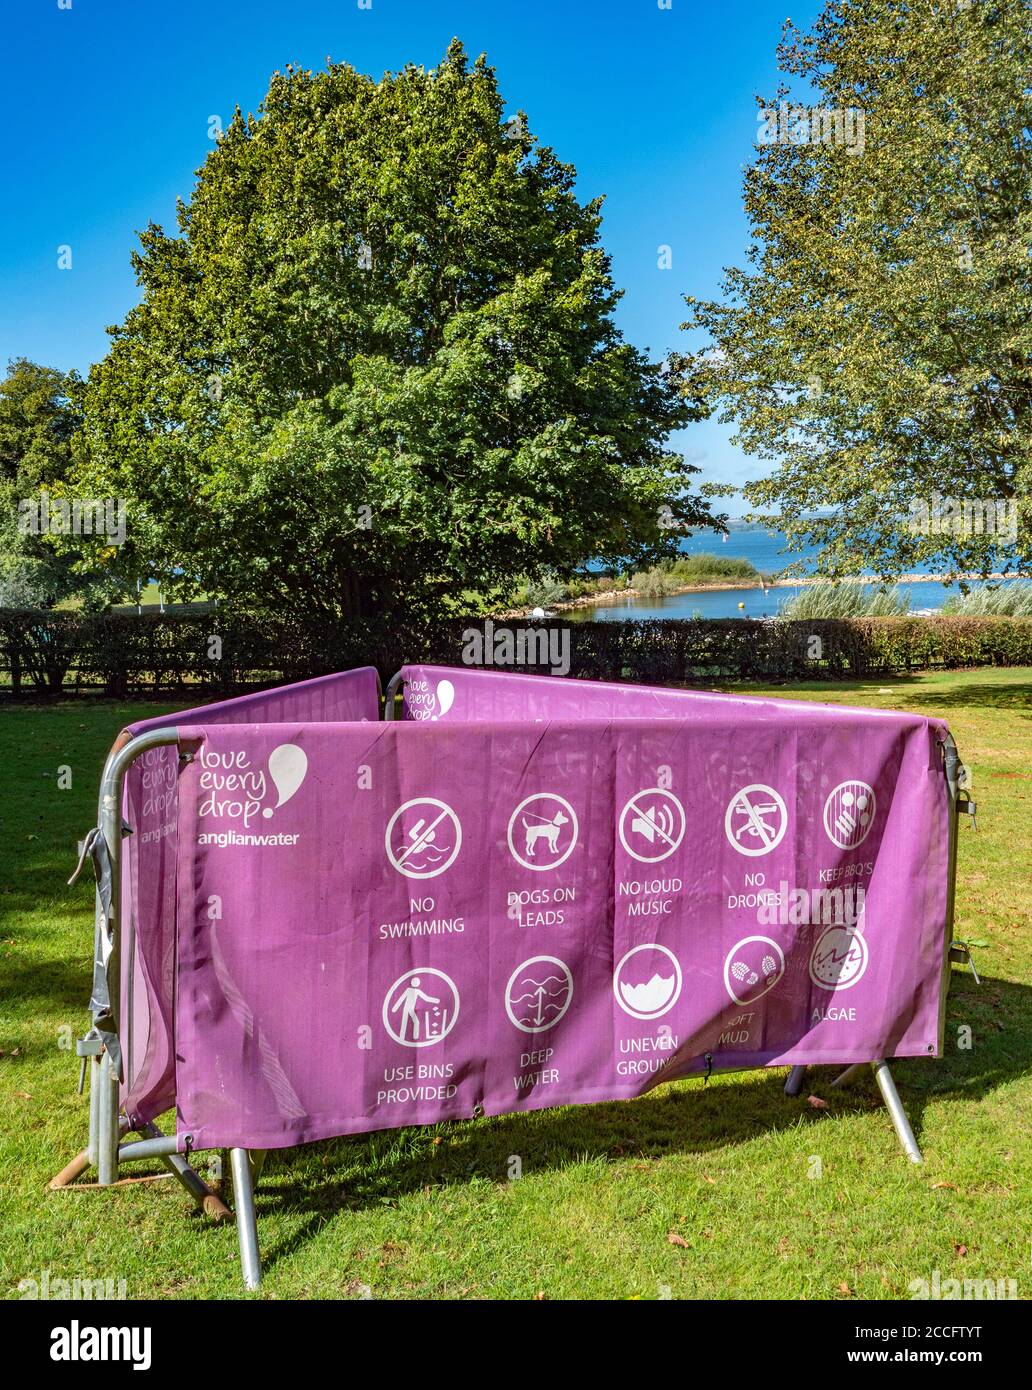 Printed canvas sign draped over metal barriers, with rules and advice to visitors at Rutland Water Park, in the summer sunshine. England, UK. Stock Photo